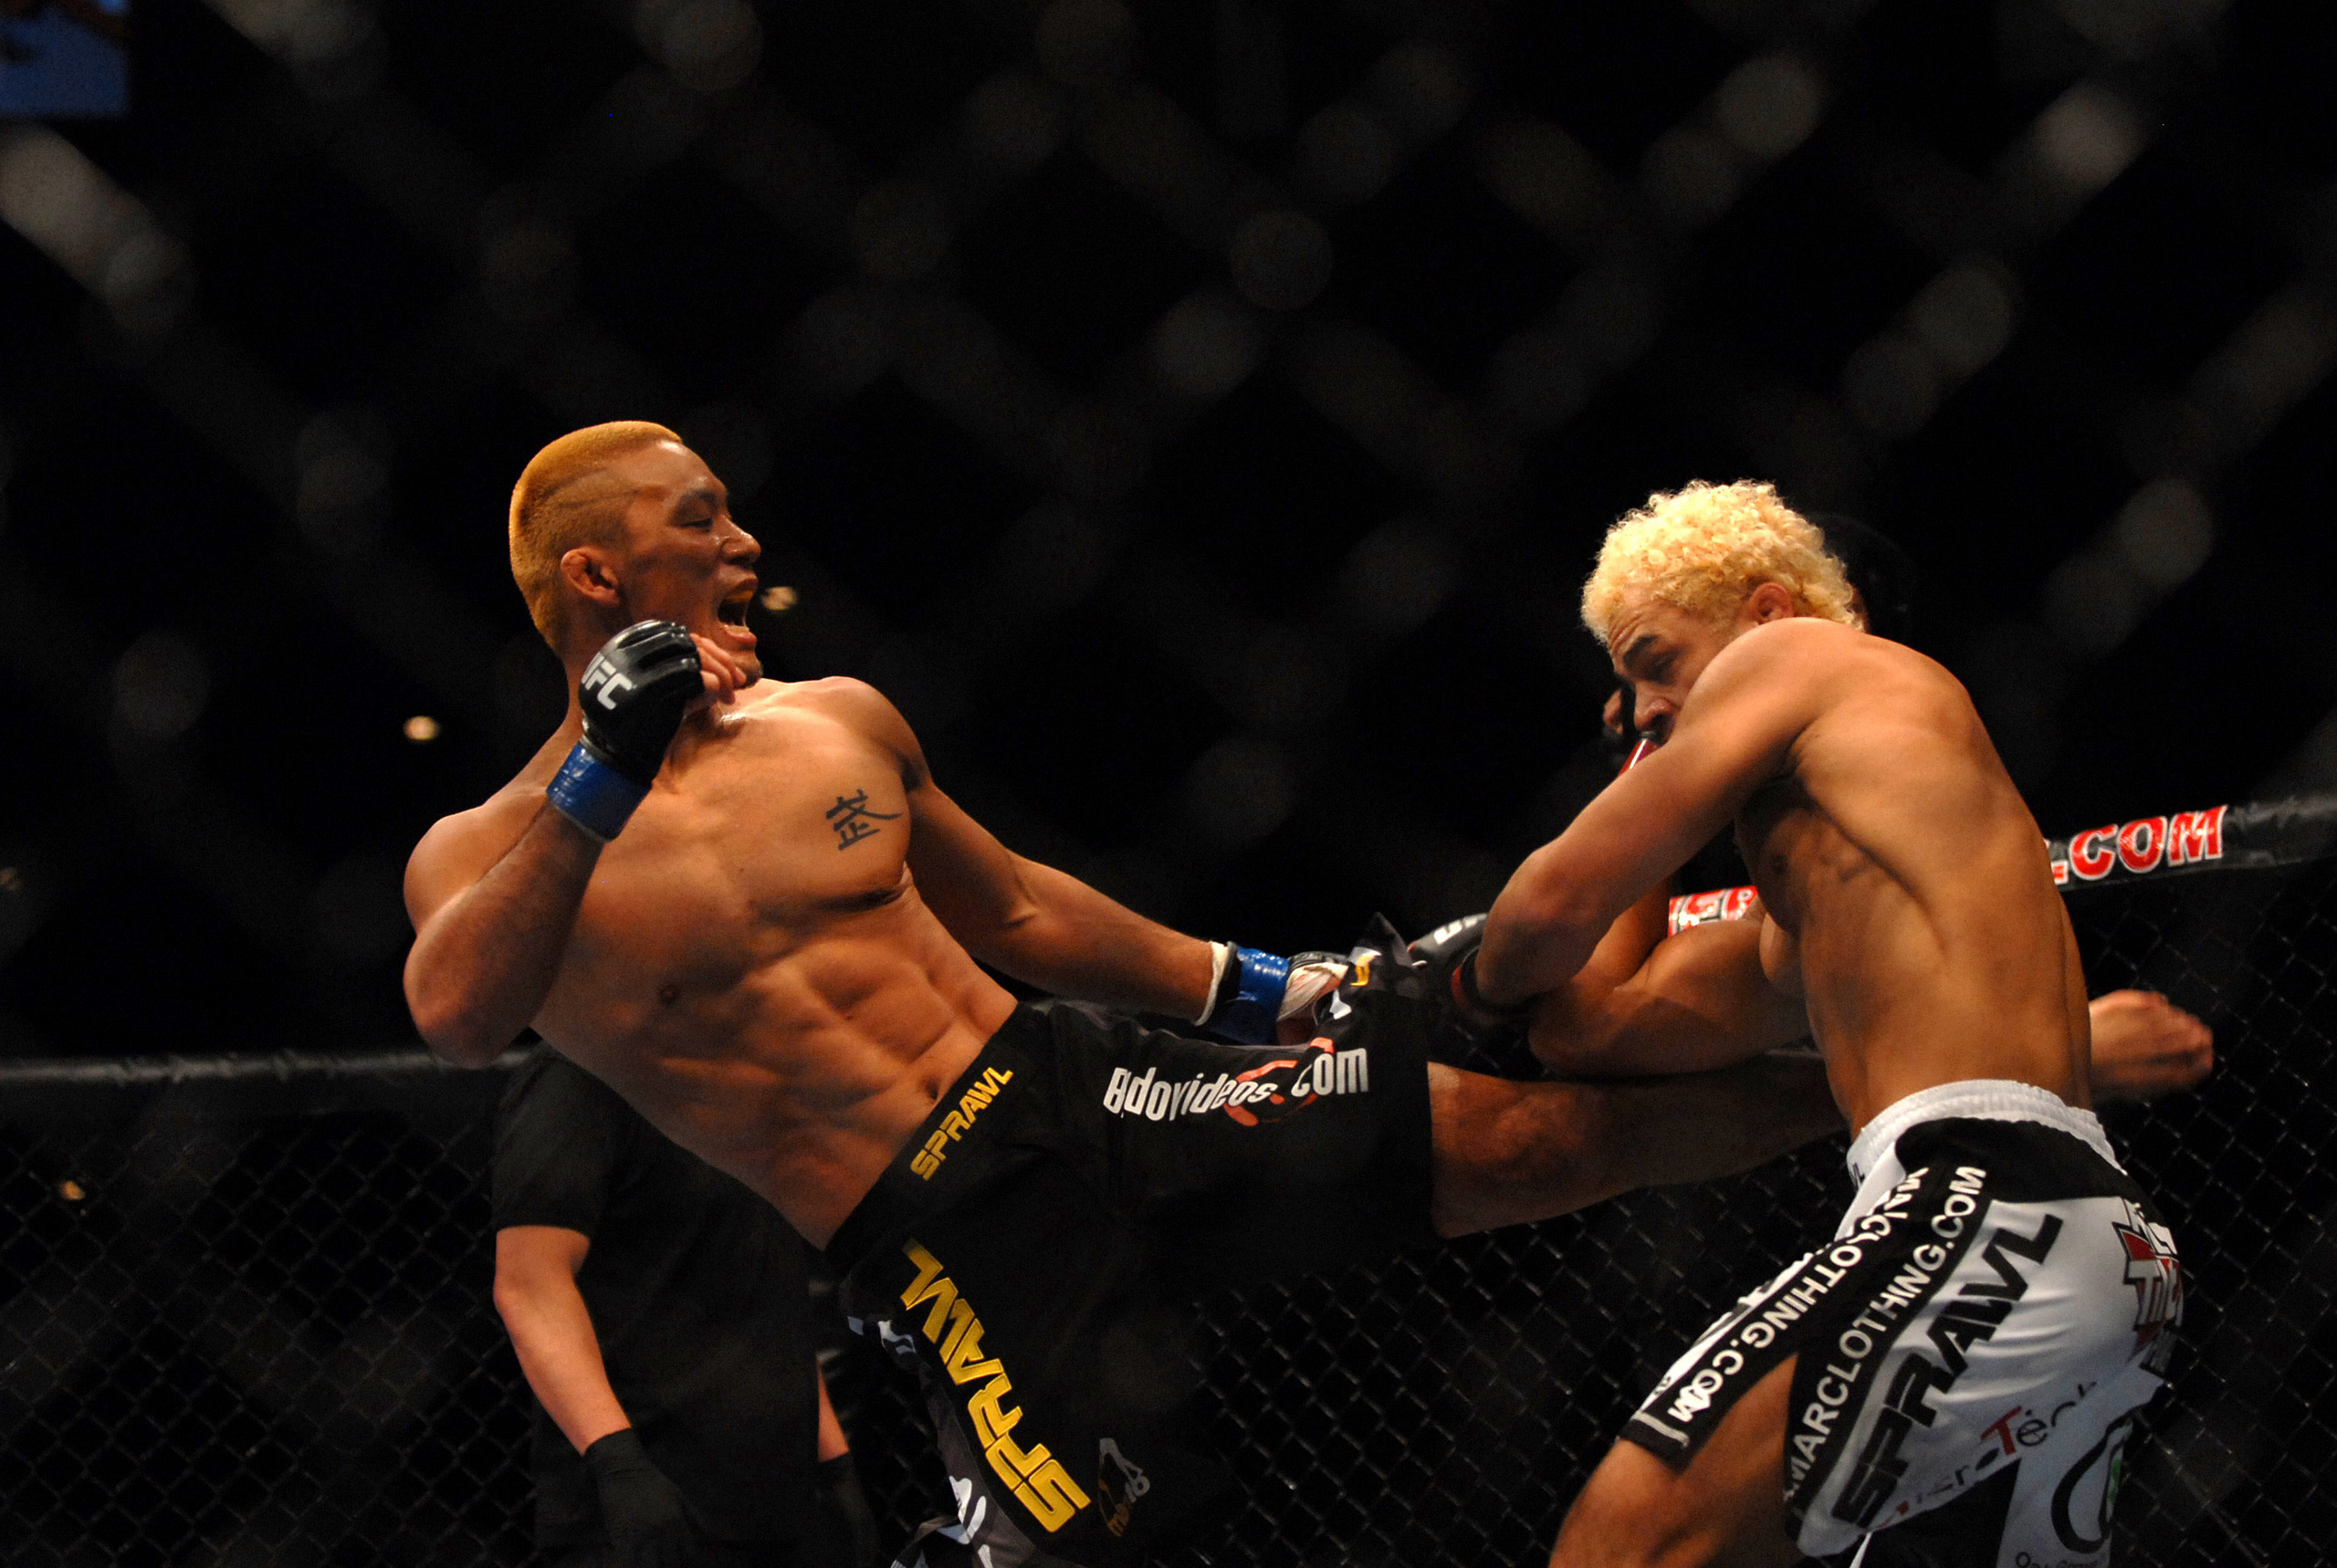 The Ultimate Fighter images UFC at Ft. Bragg HD wallpaper and